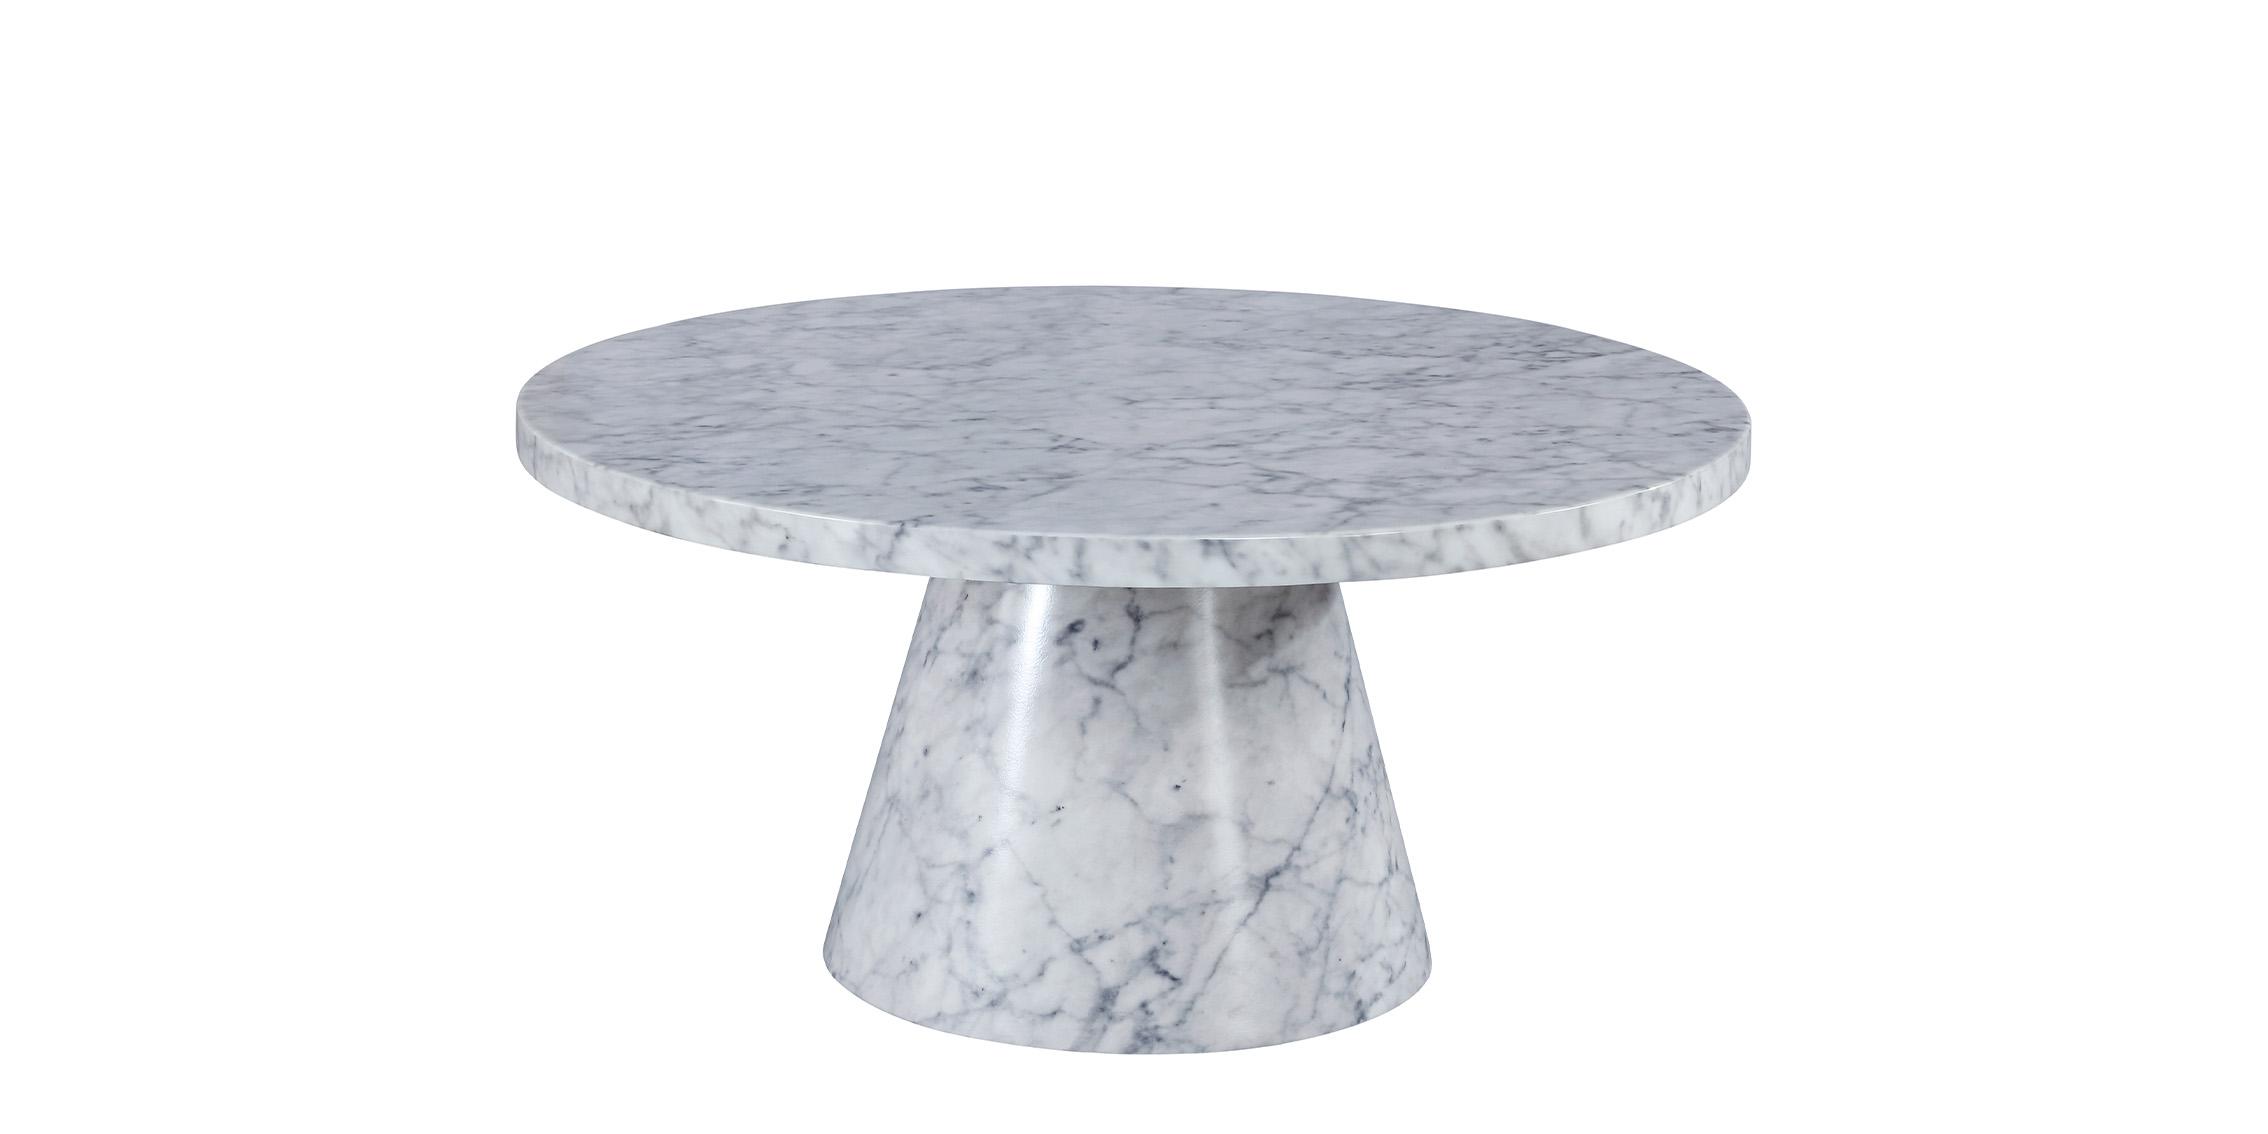 Contemporary, Modern Coffee Table OMNI 274-CT 274-CT in White, Gray 